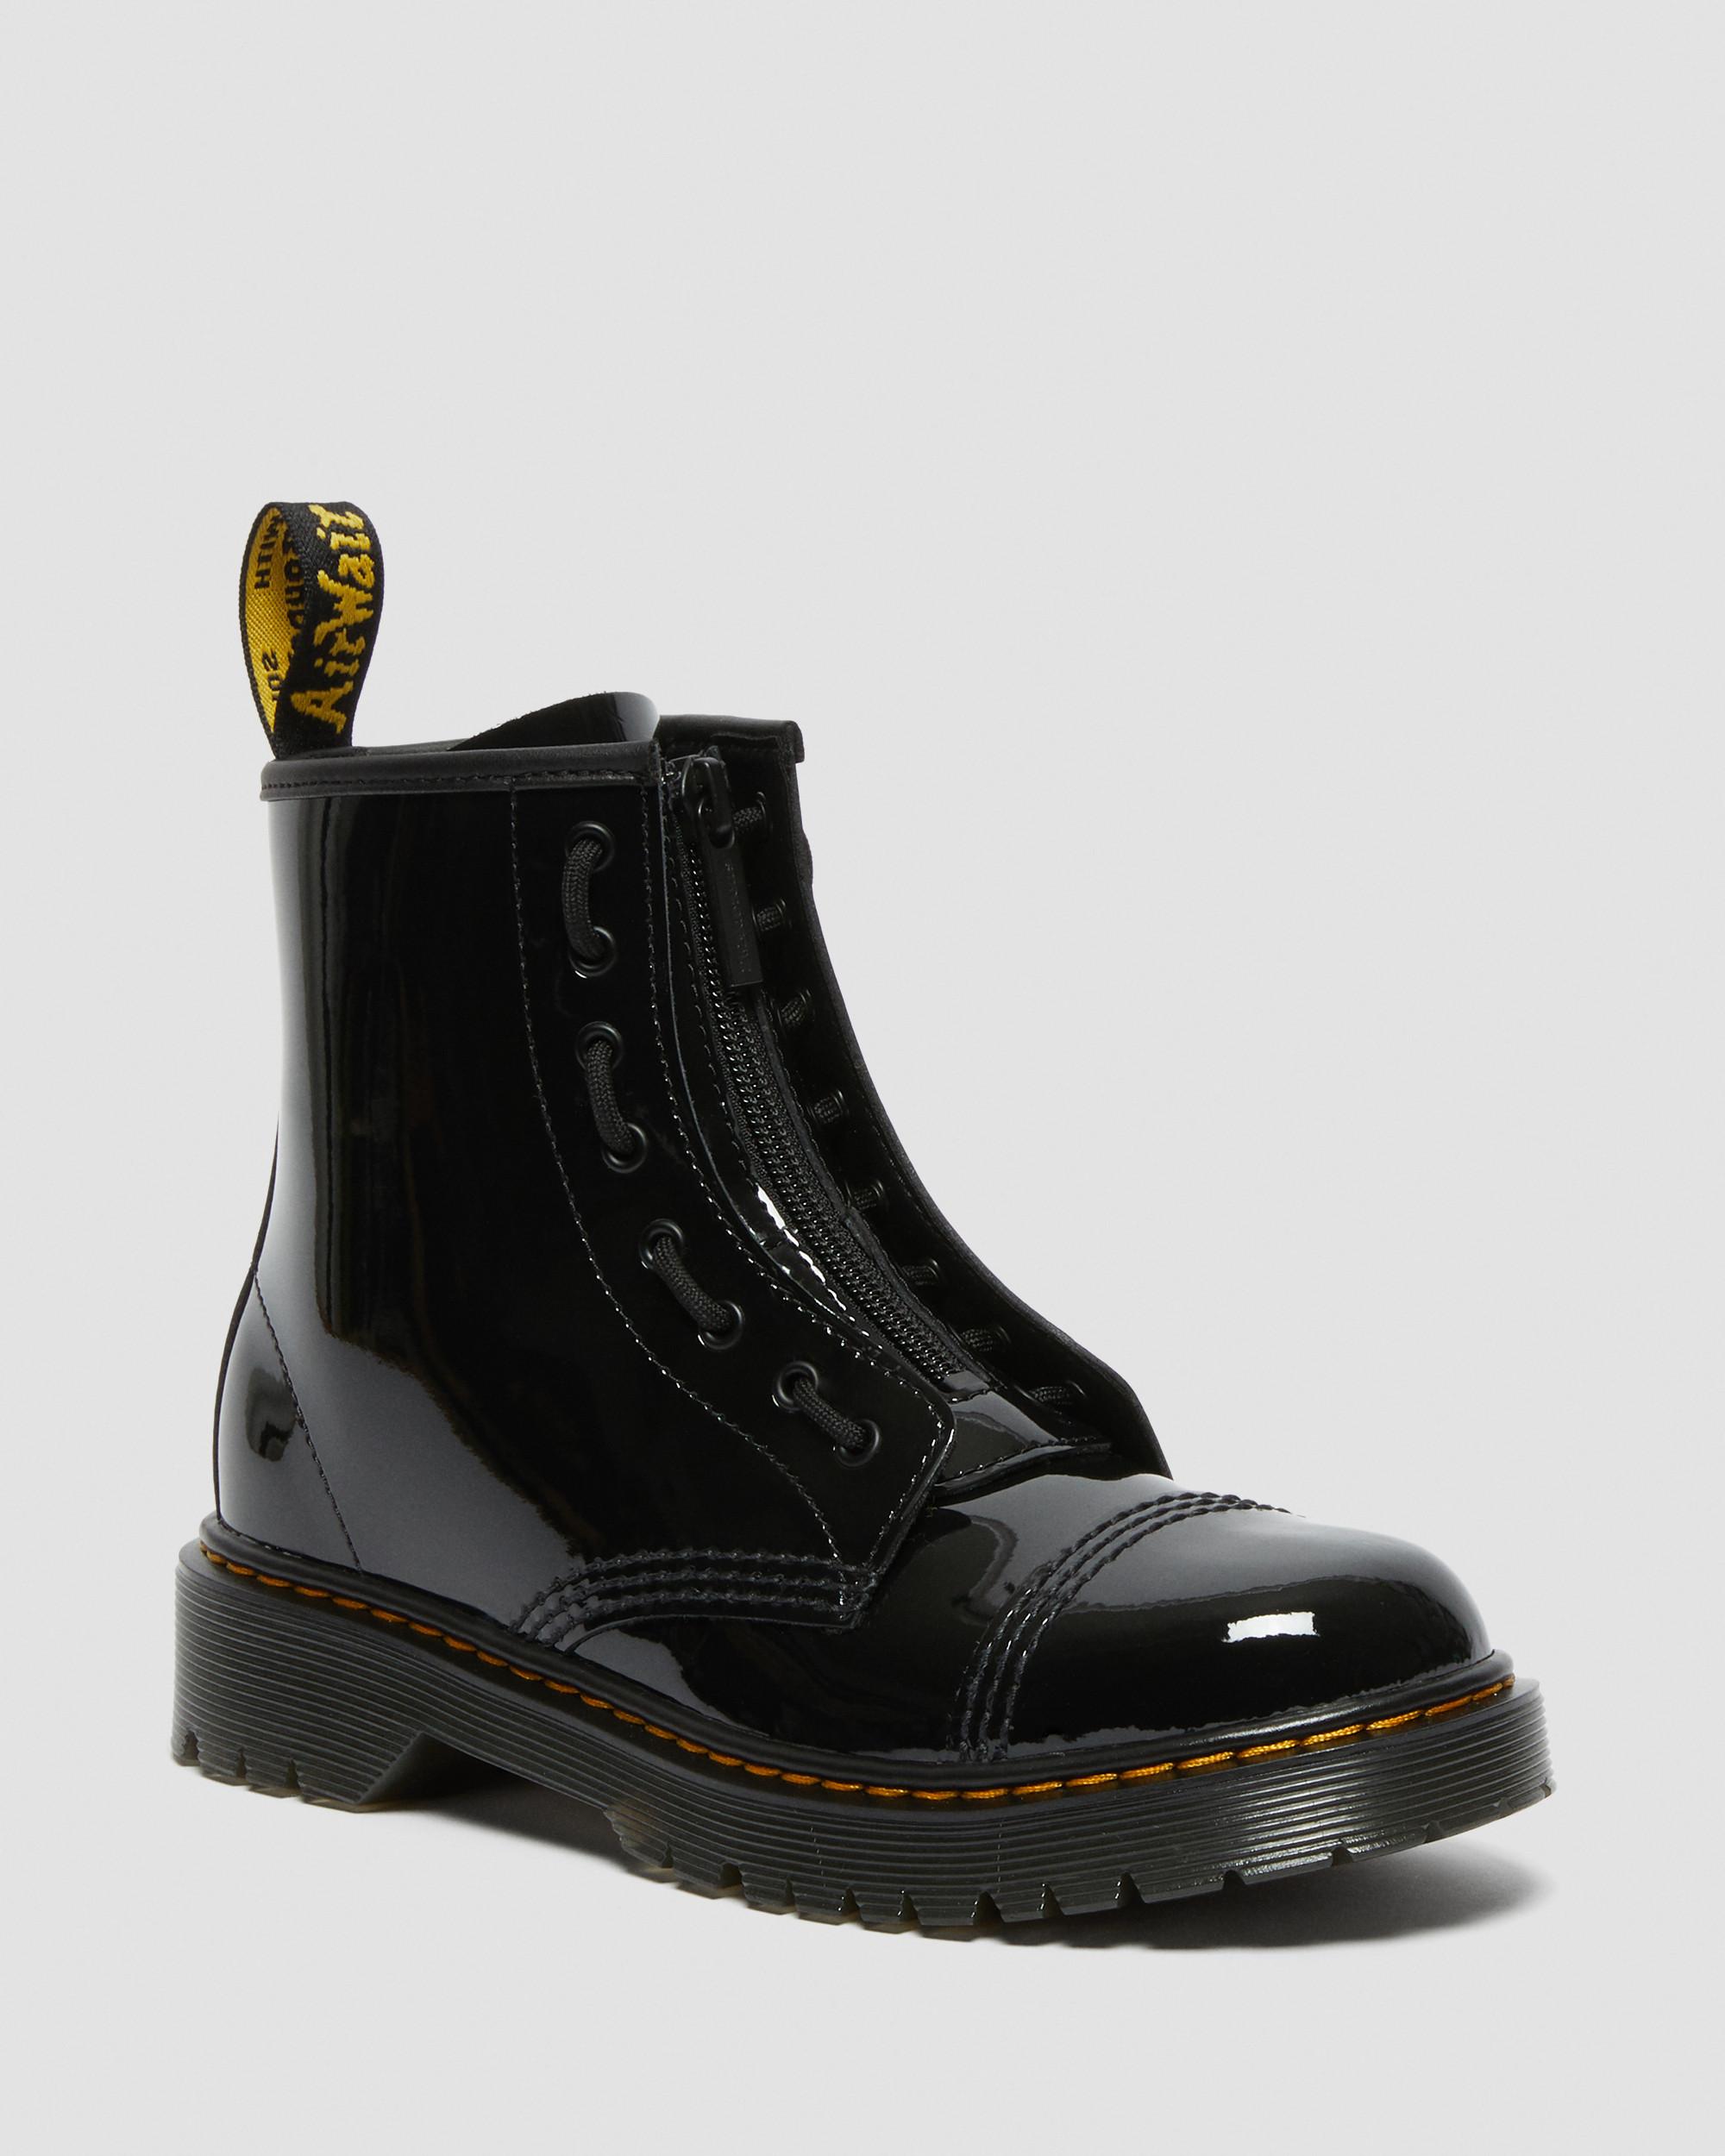 Youth Martens | Boots Up Dr. Black 1460 T Leather in Lace Softy